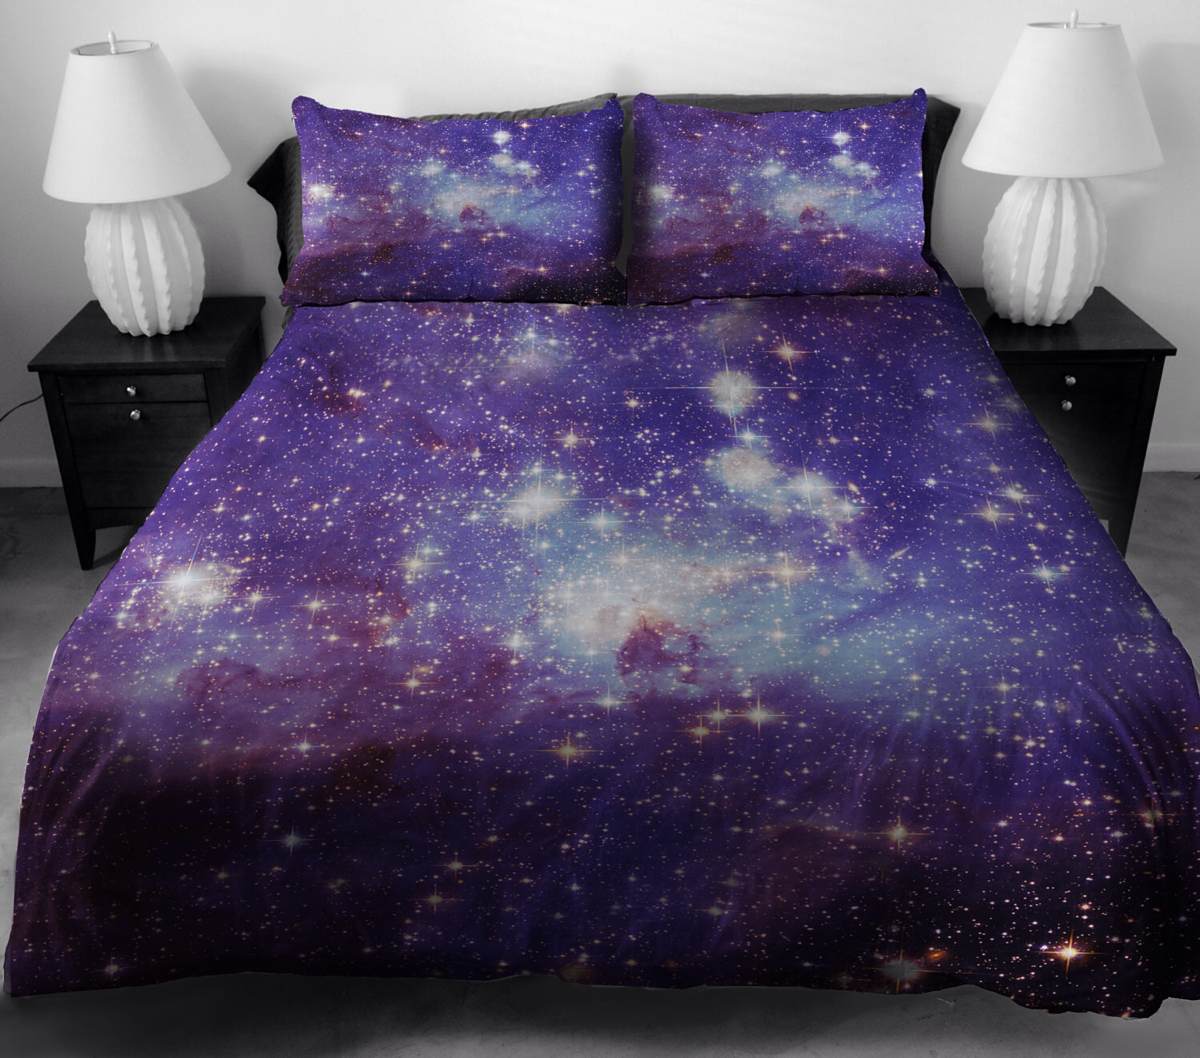 Galaxy Bedding Sets Tools And Toys, Galaxy Duvet Cover